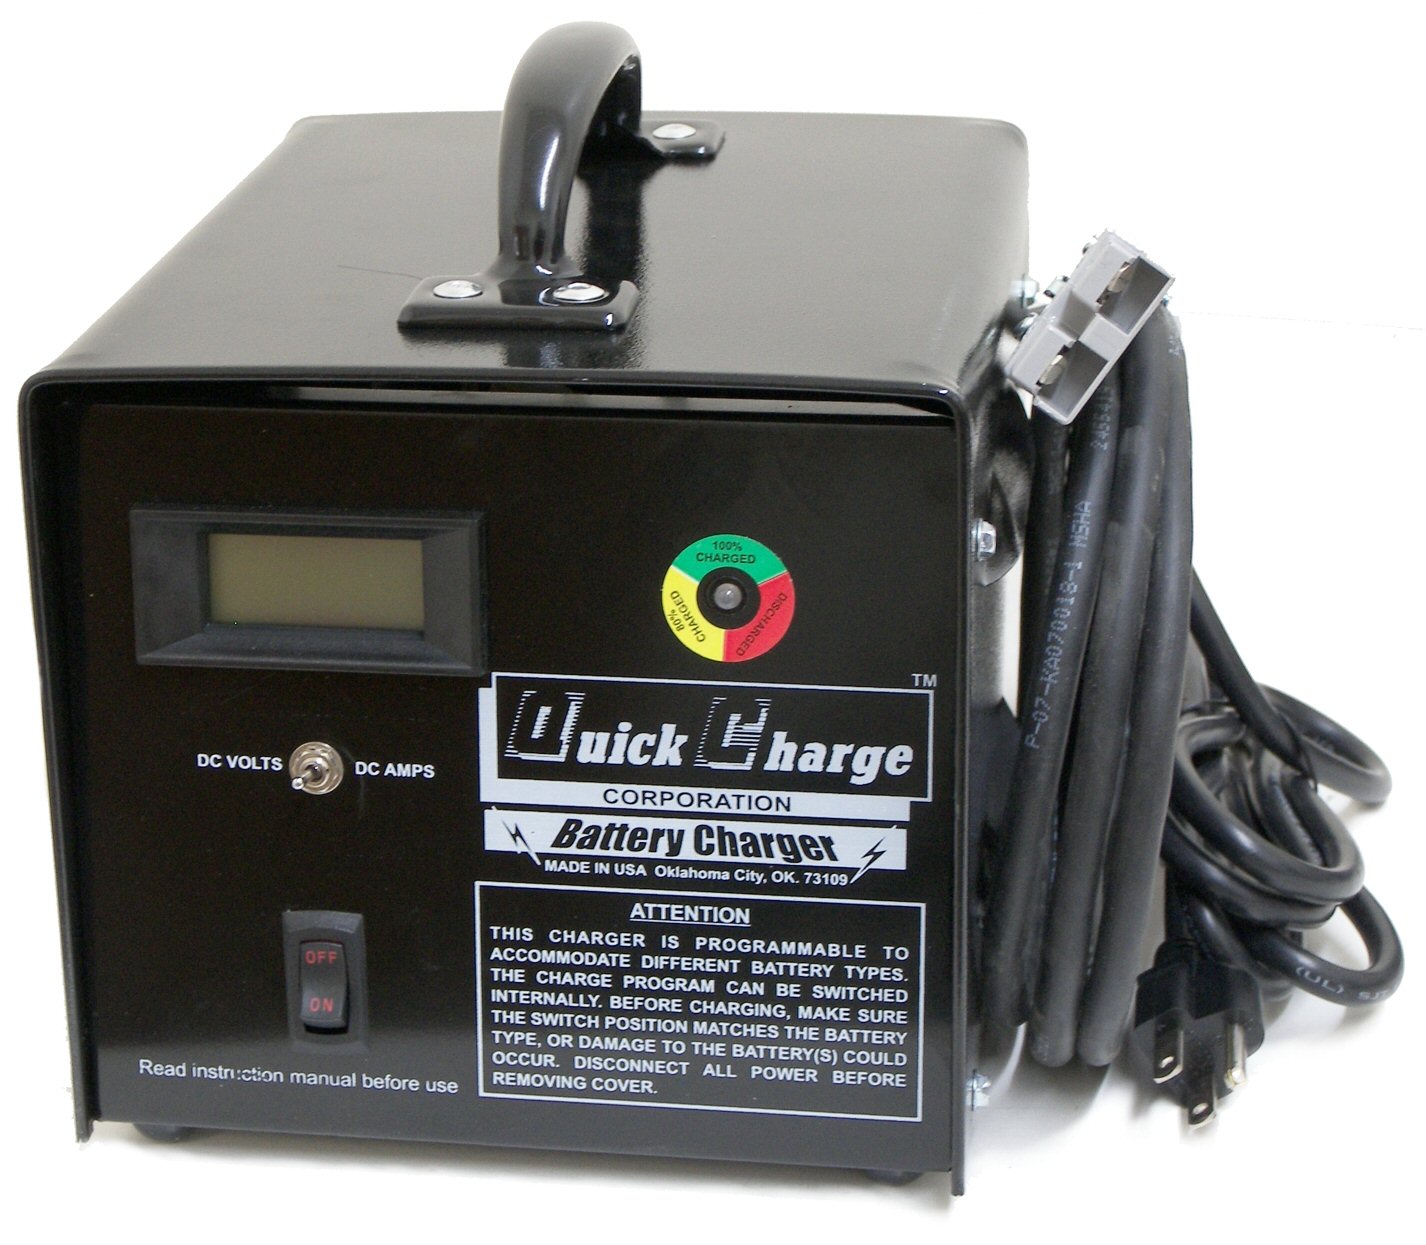 Quick Charge golf cart charger